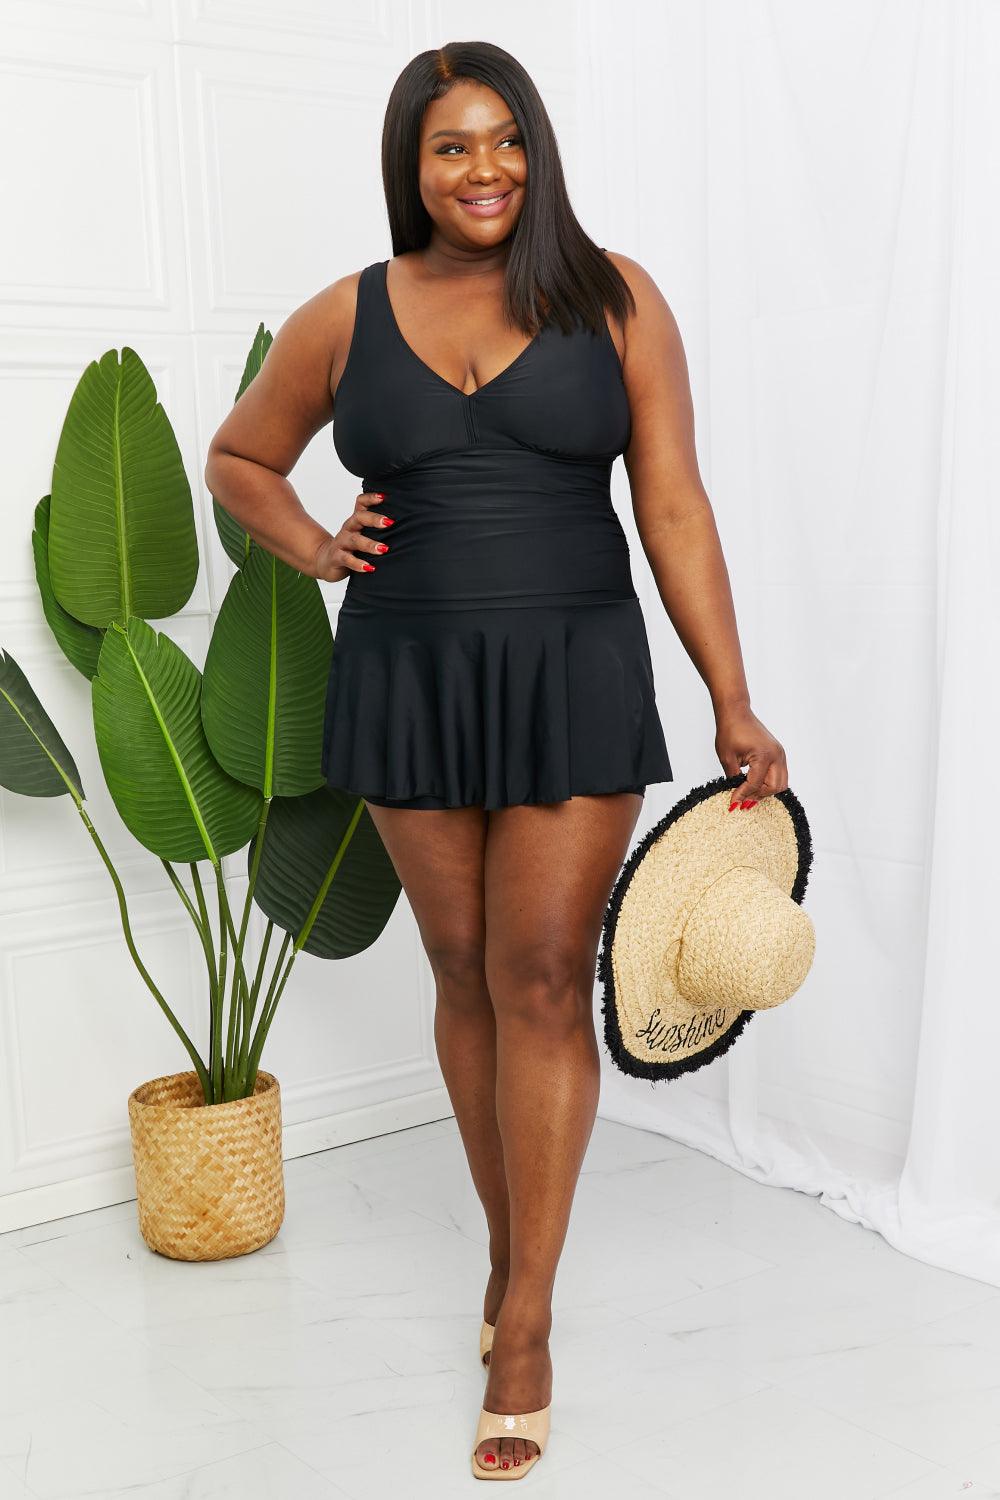 Marina West Swim Full Size Clear Waters Swim Dress in Black - God's Girl Gifts And Apparel